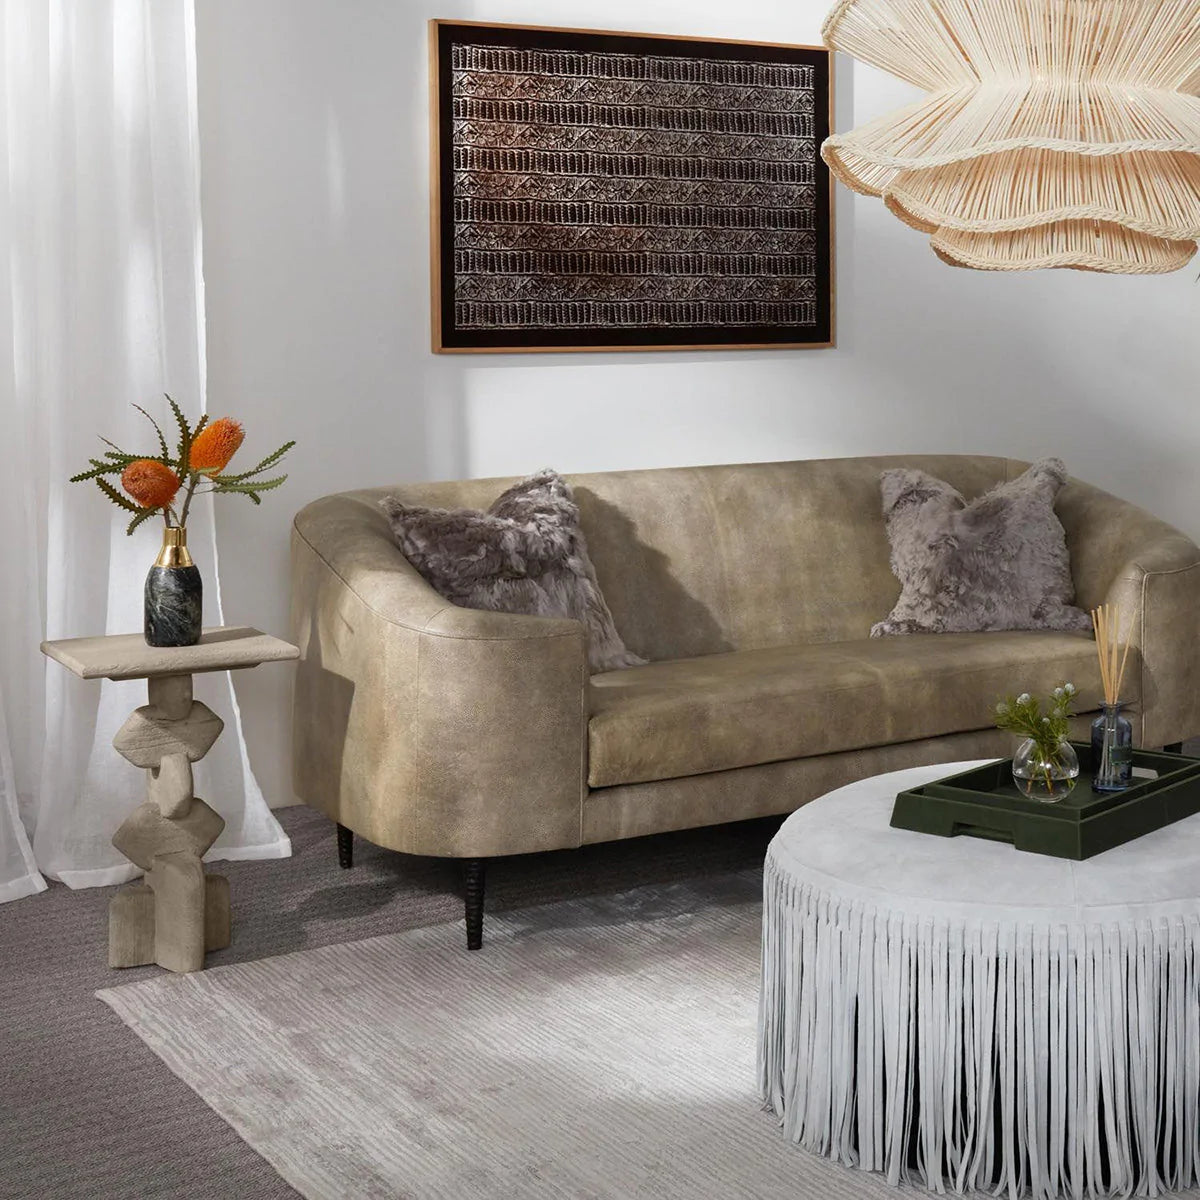 Made Goods Basset Contemporary Cabriole-Style Sofa in Aras Mohair